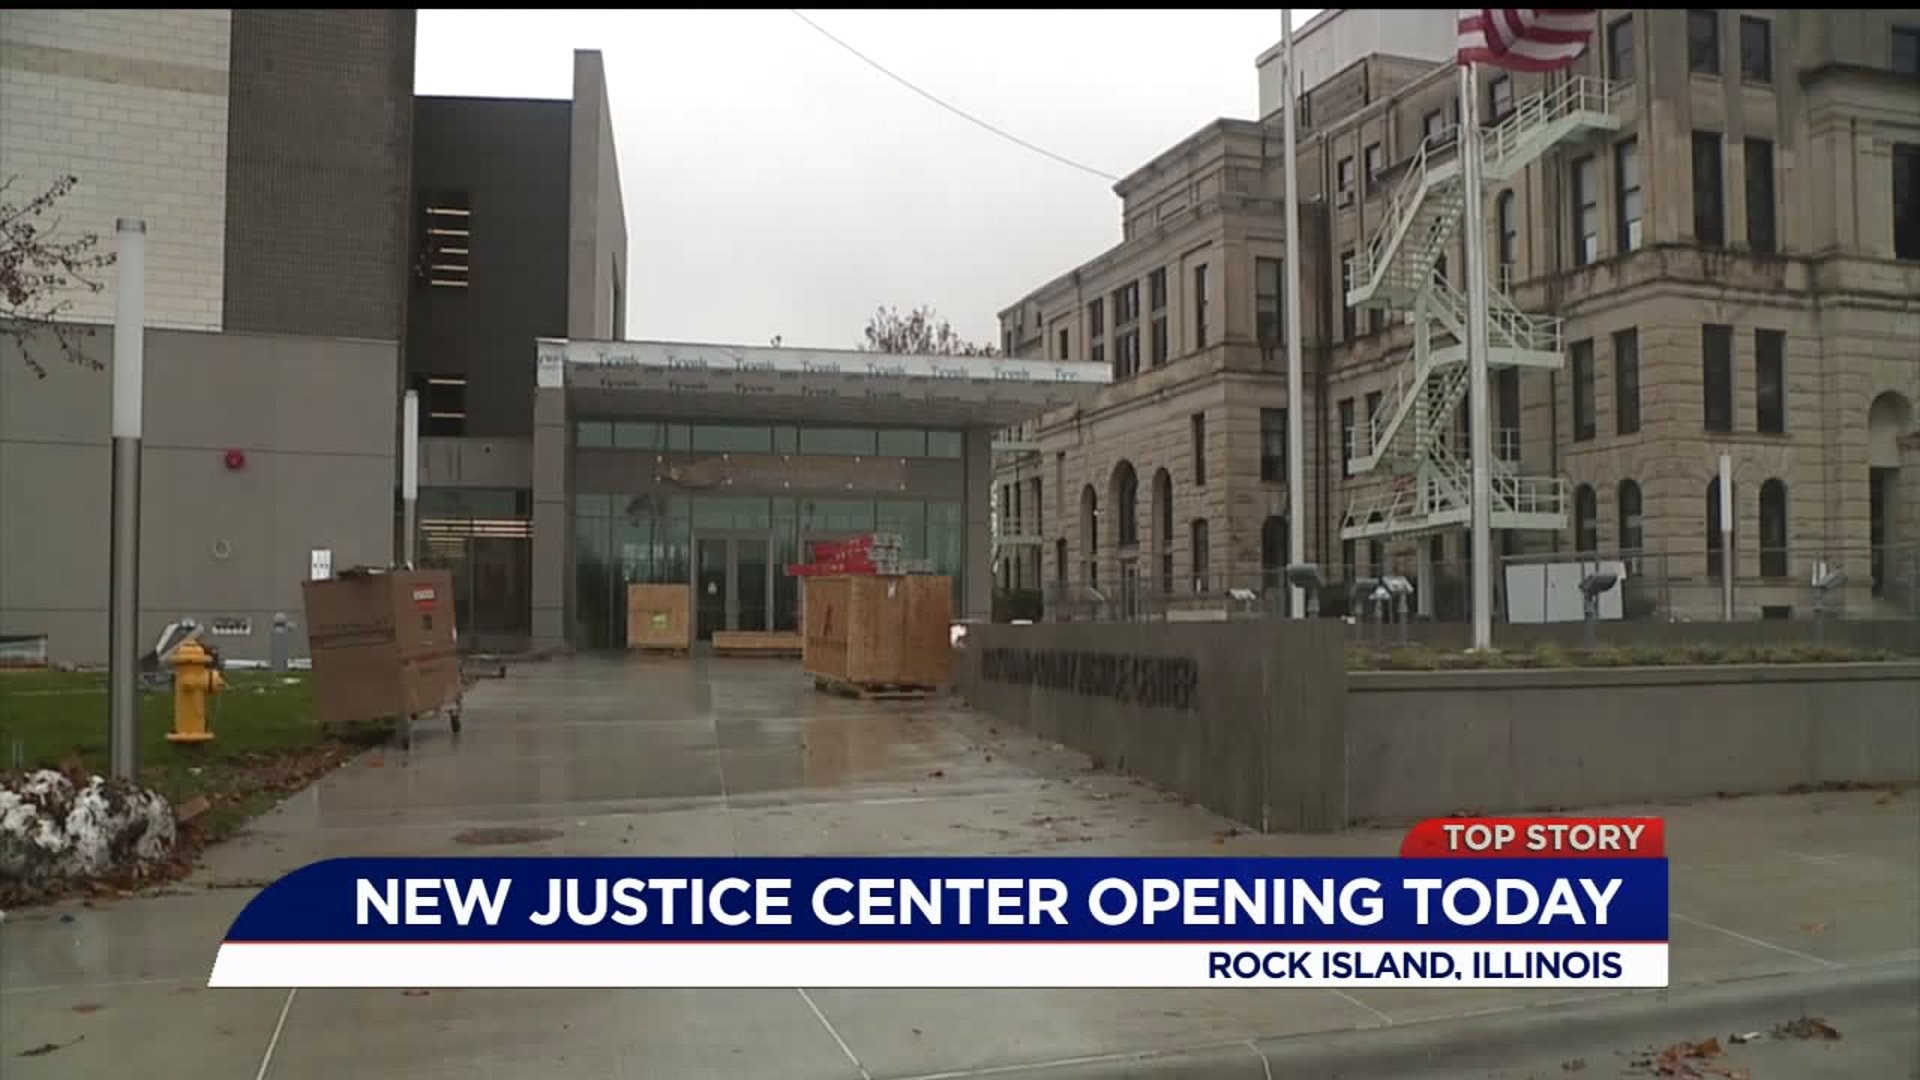 Historic RICO courthouse is "Old, wreck of a building" chief judge says